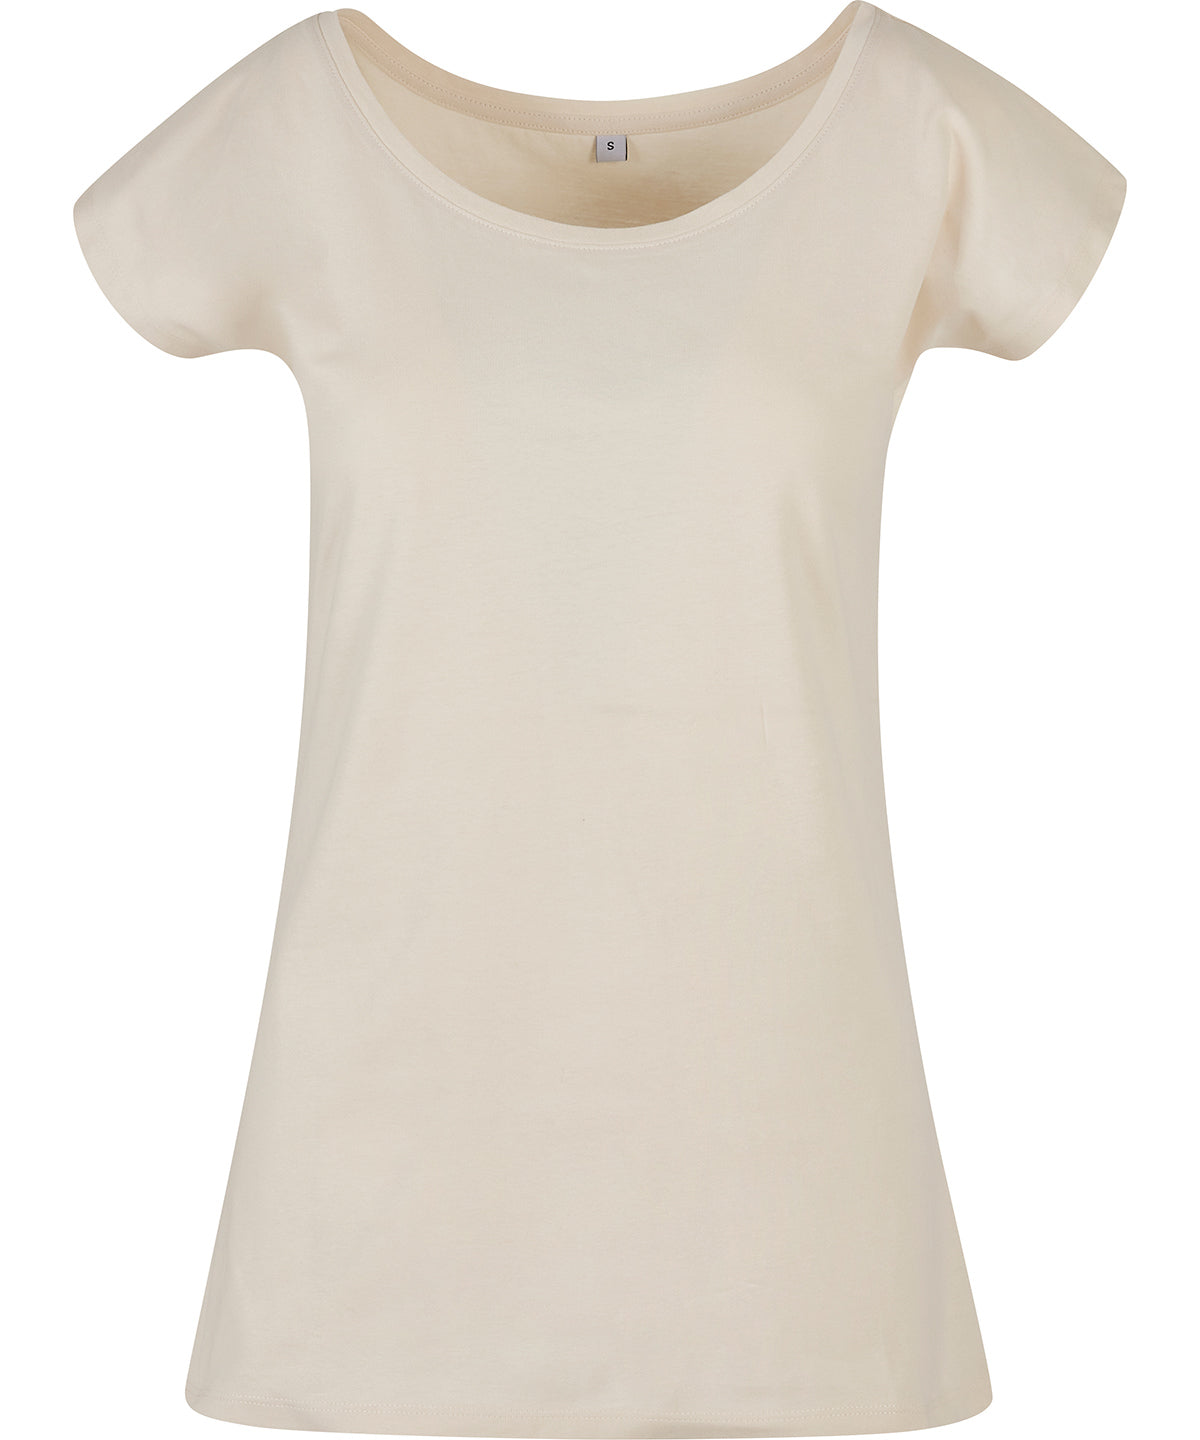 Build Your Brand Basic Womens Wide Neck Tee Sand